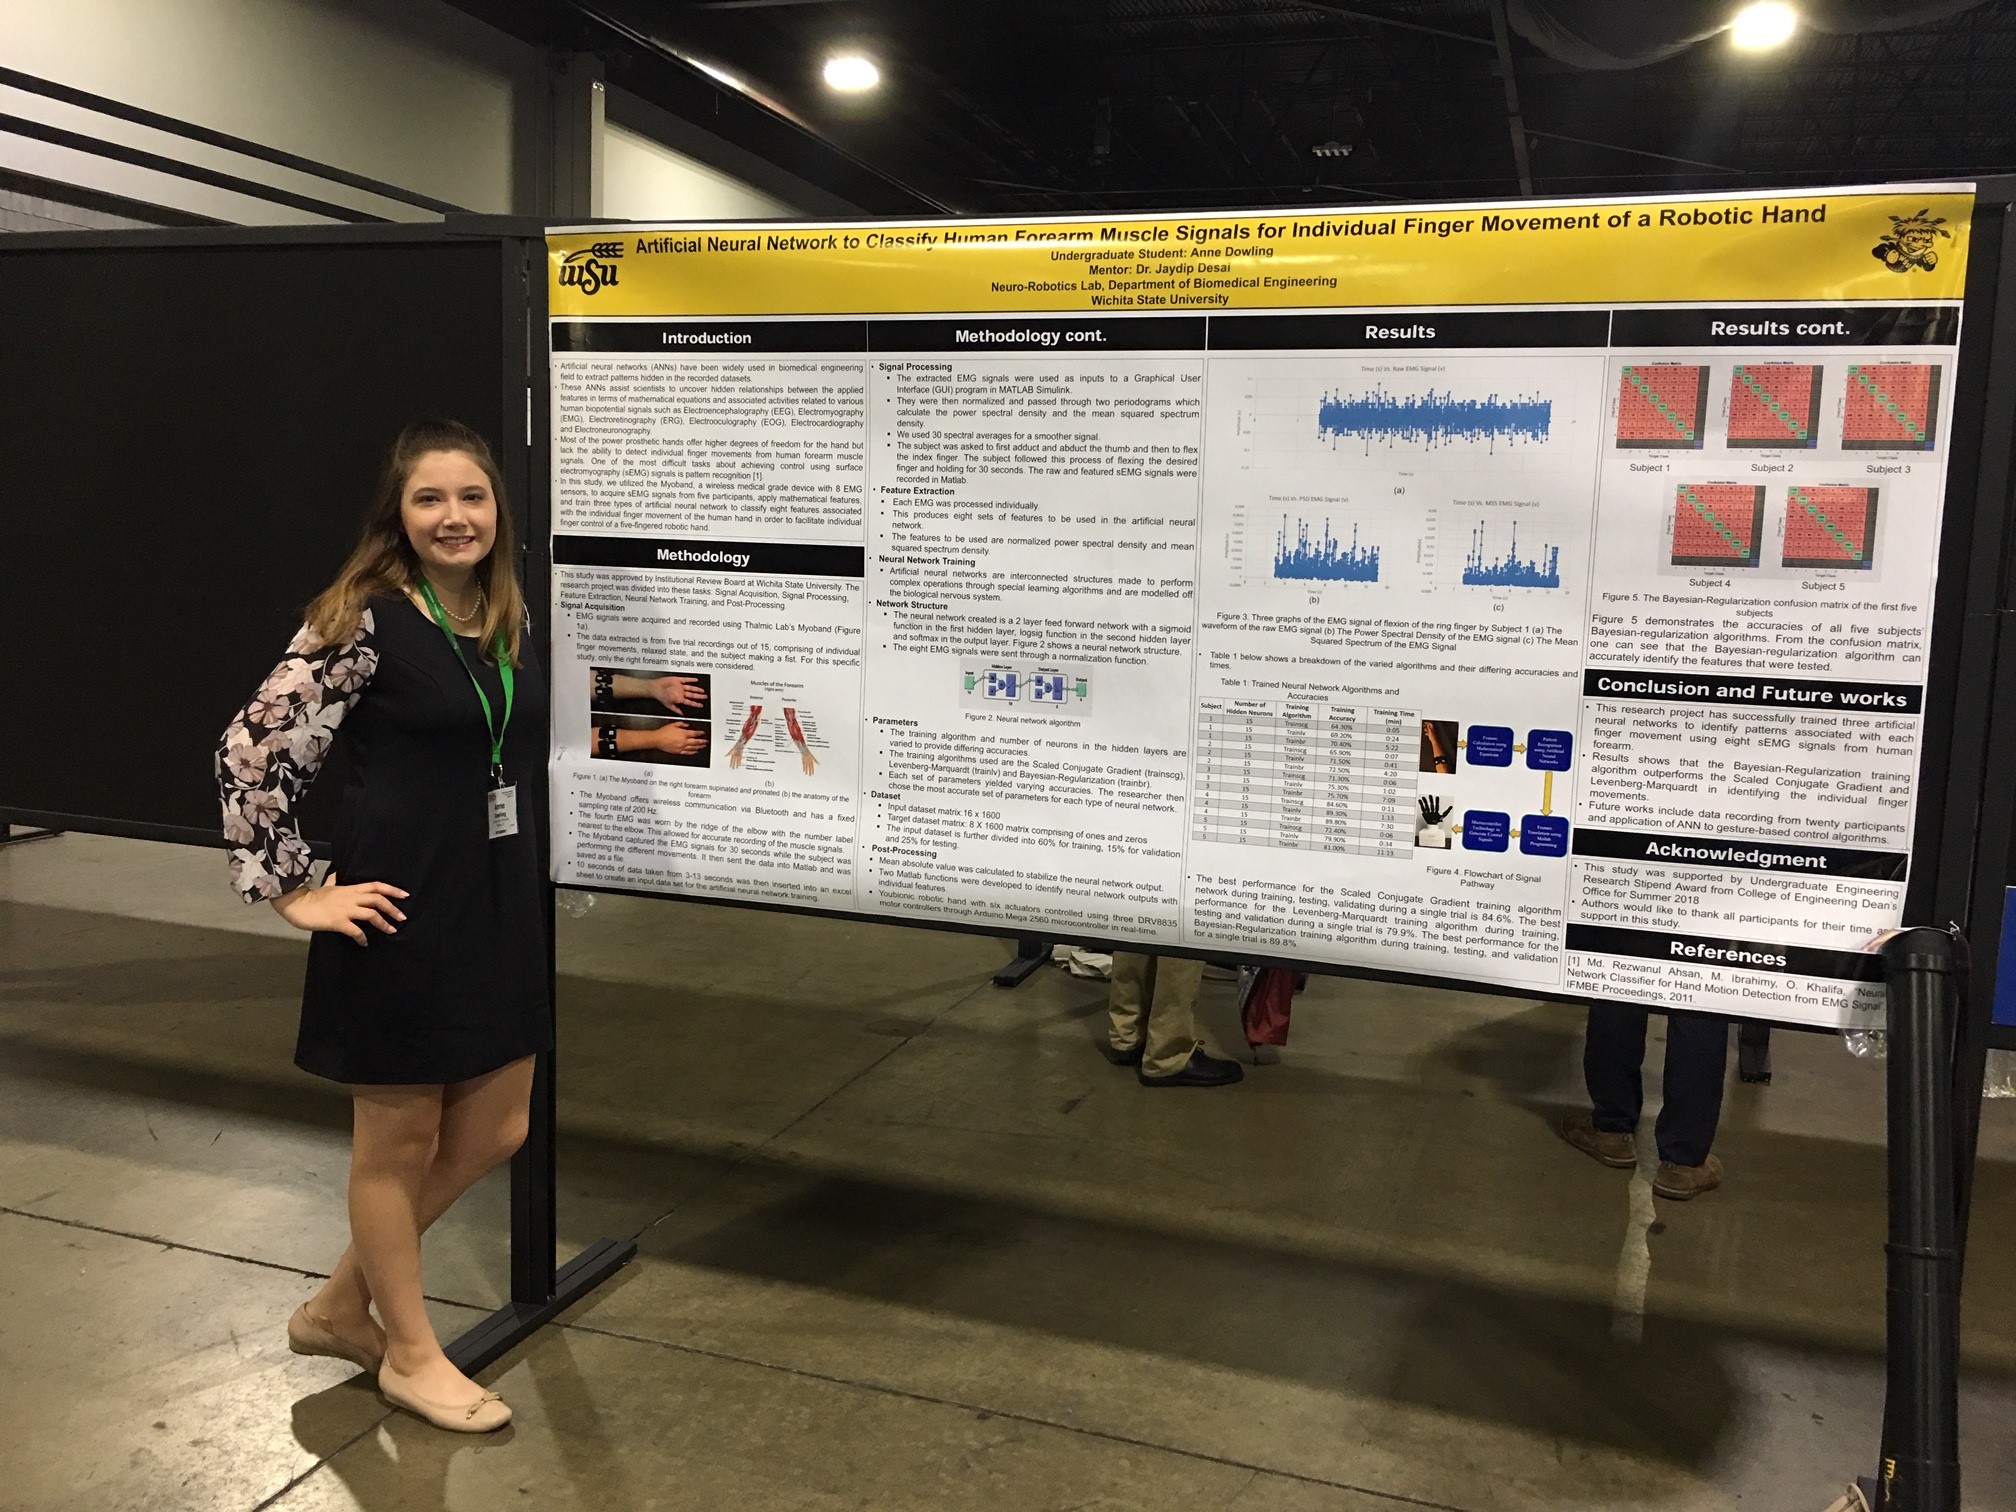 Anne Dowling Presented at the 2018 BMES Annual Meeting